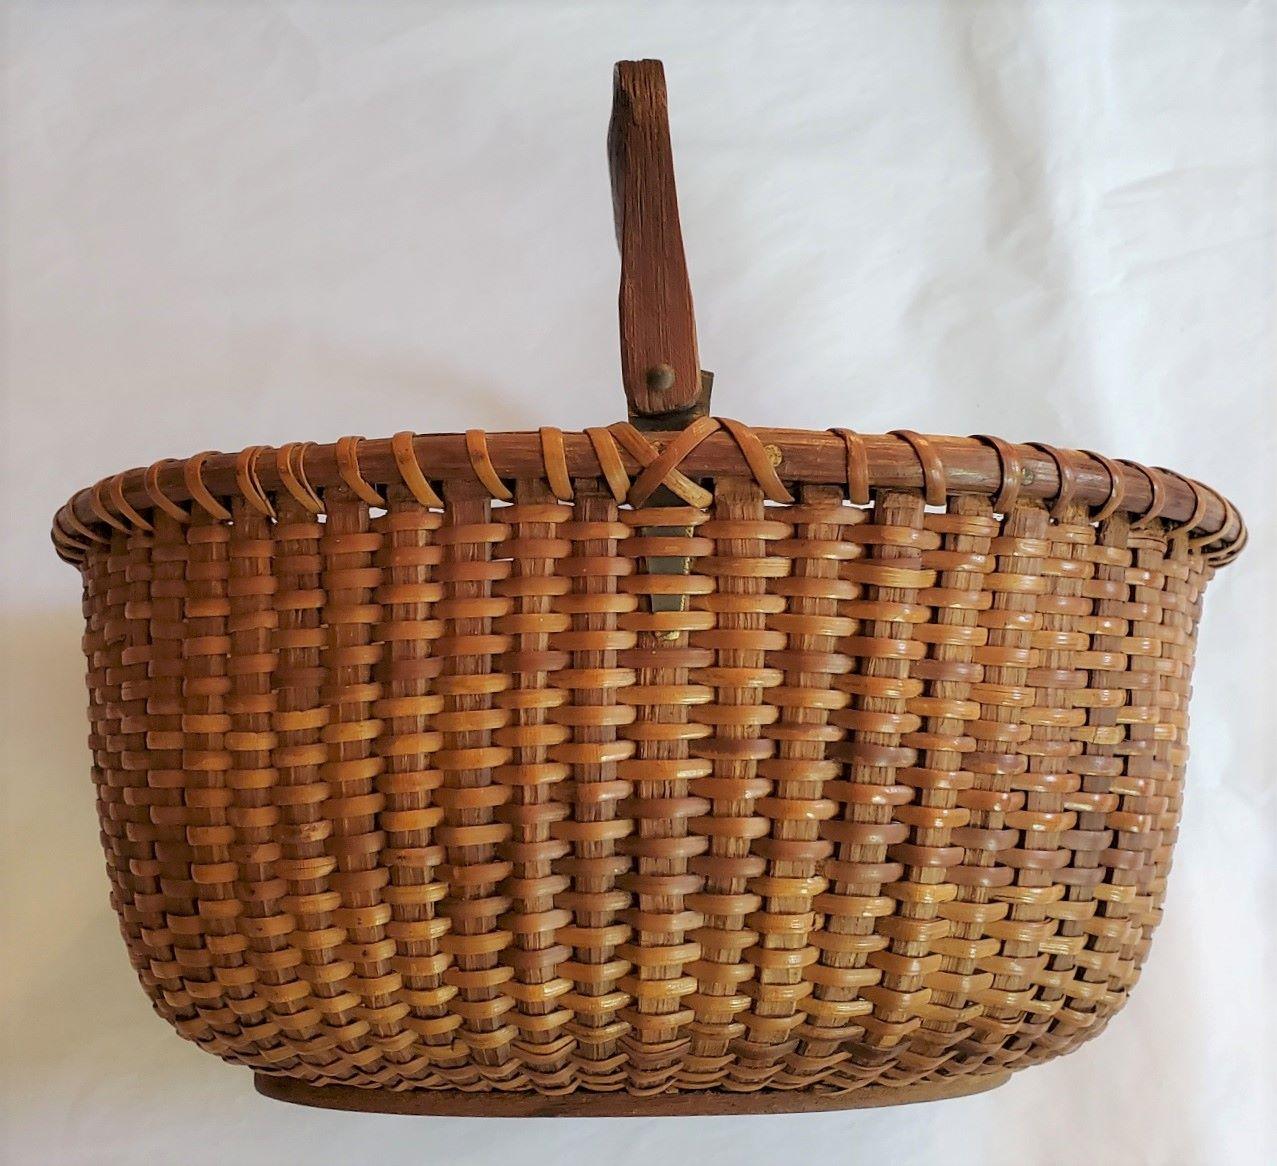 Early 20th Century Nantucket Oval Basket attributed to A.D. Williams (Nantucket: 1867 - 1940), circa 1920, an oval open swing handled Nantucket basket with cane weave on oak staves, slender carved handle attached to short tin ears entrapped under